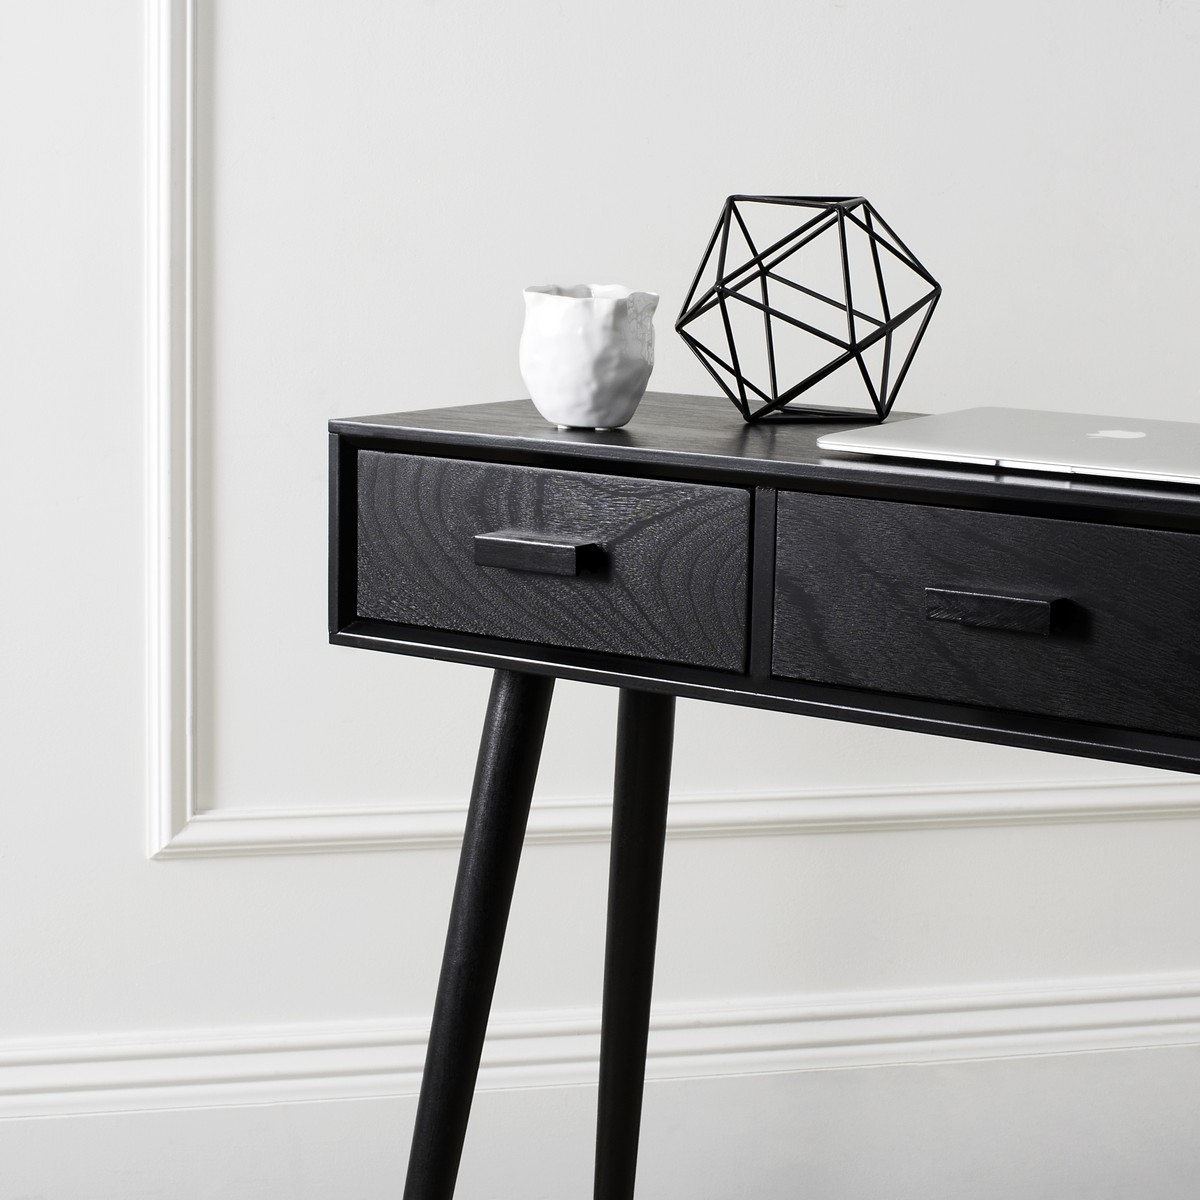 Albus 3 Drawer Console Table - Black - Arlo Home - Image 1